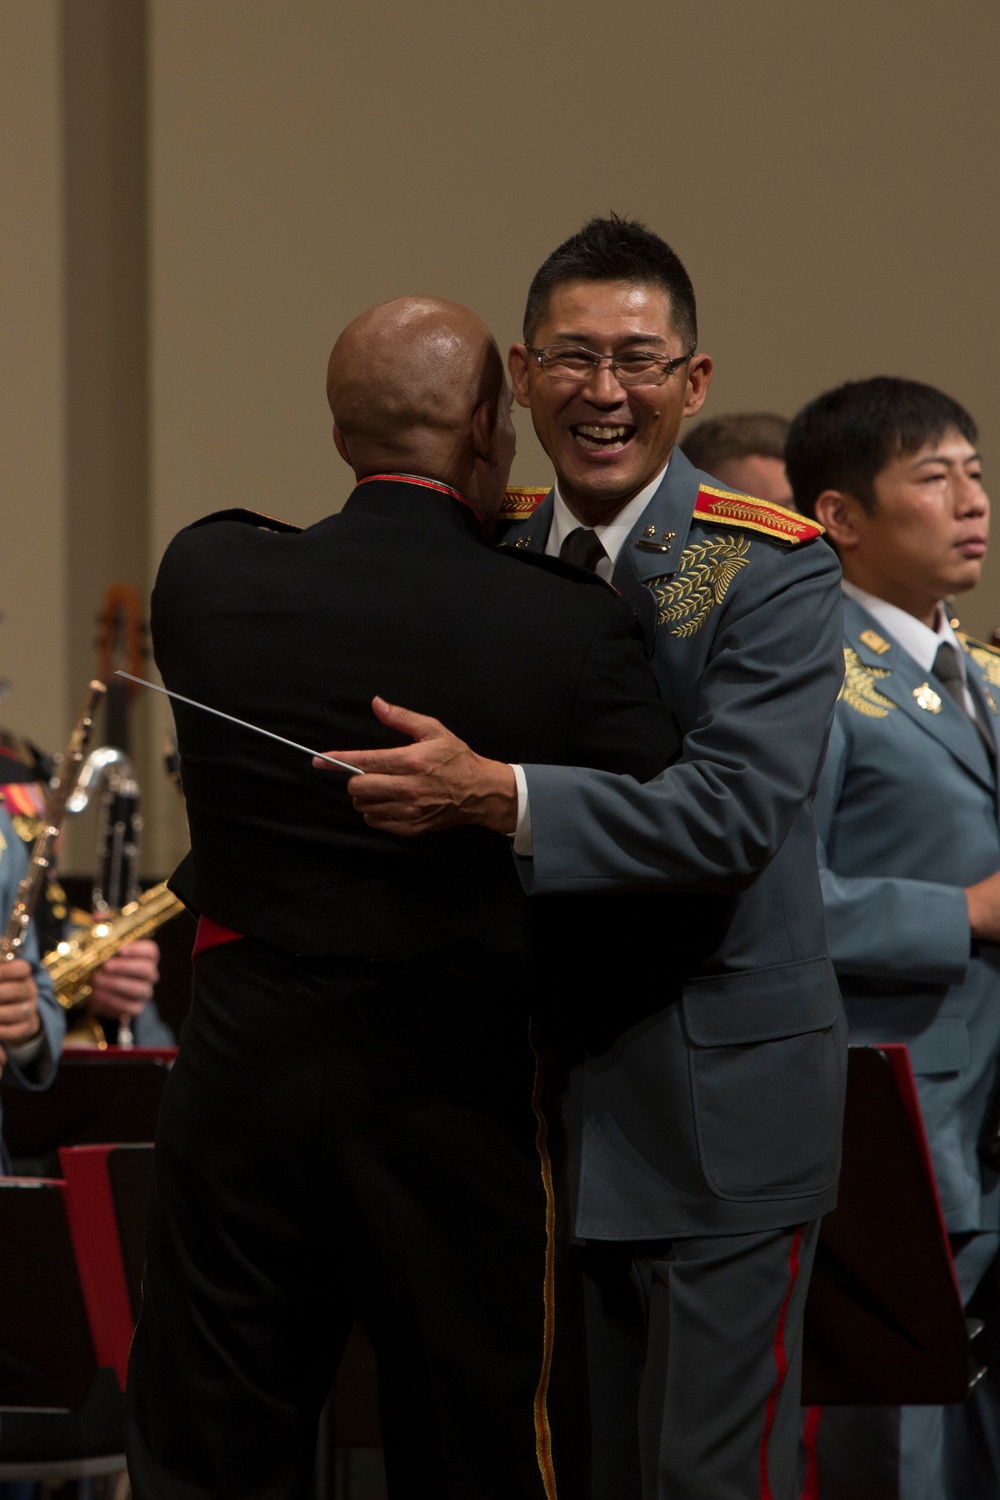 III MEF Band and JGSDF 15th Brigade band come together for a night of harmony, friendship